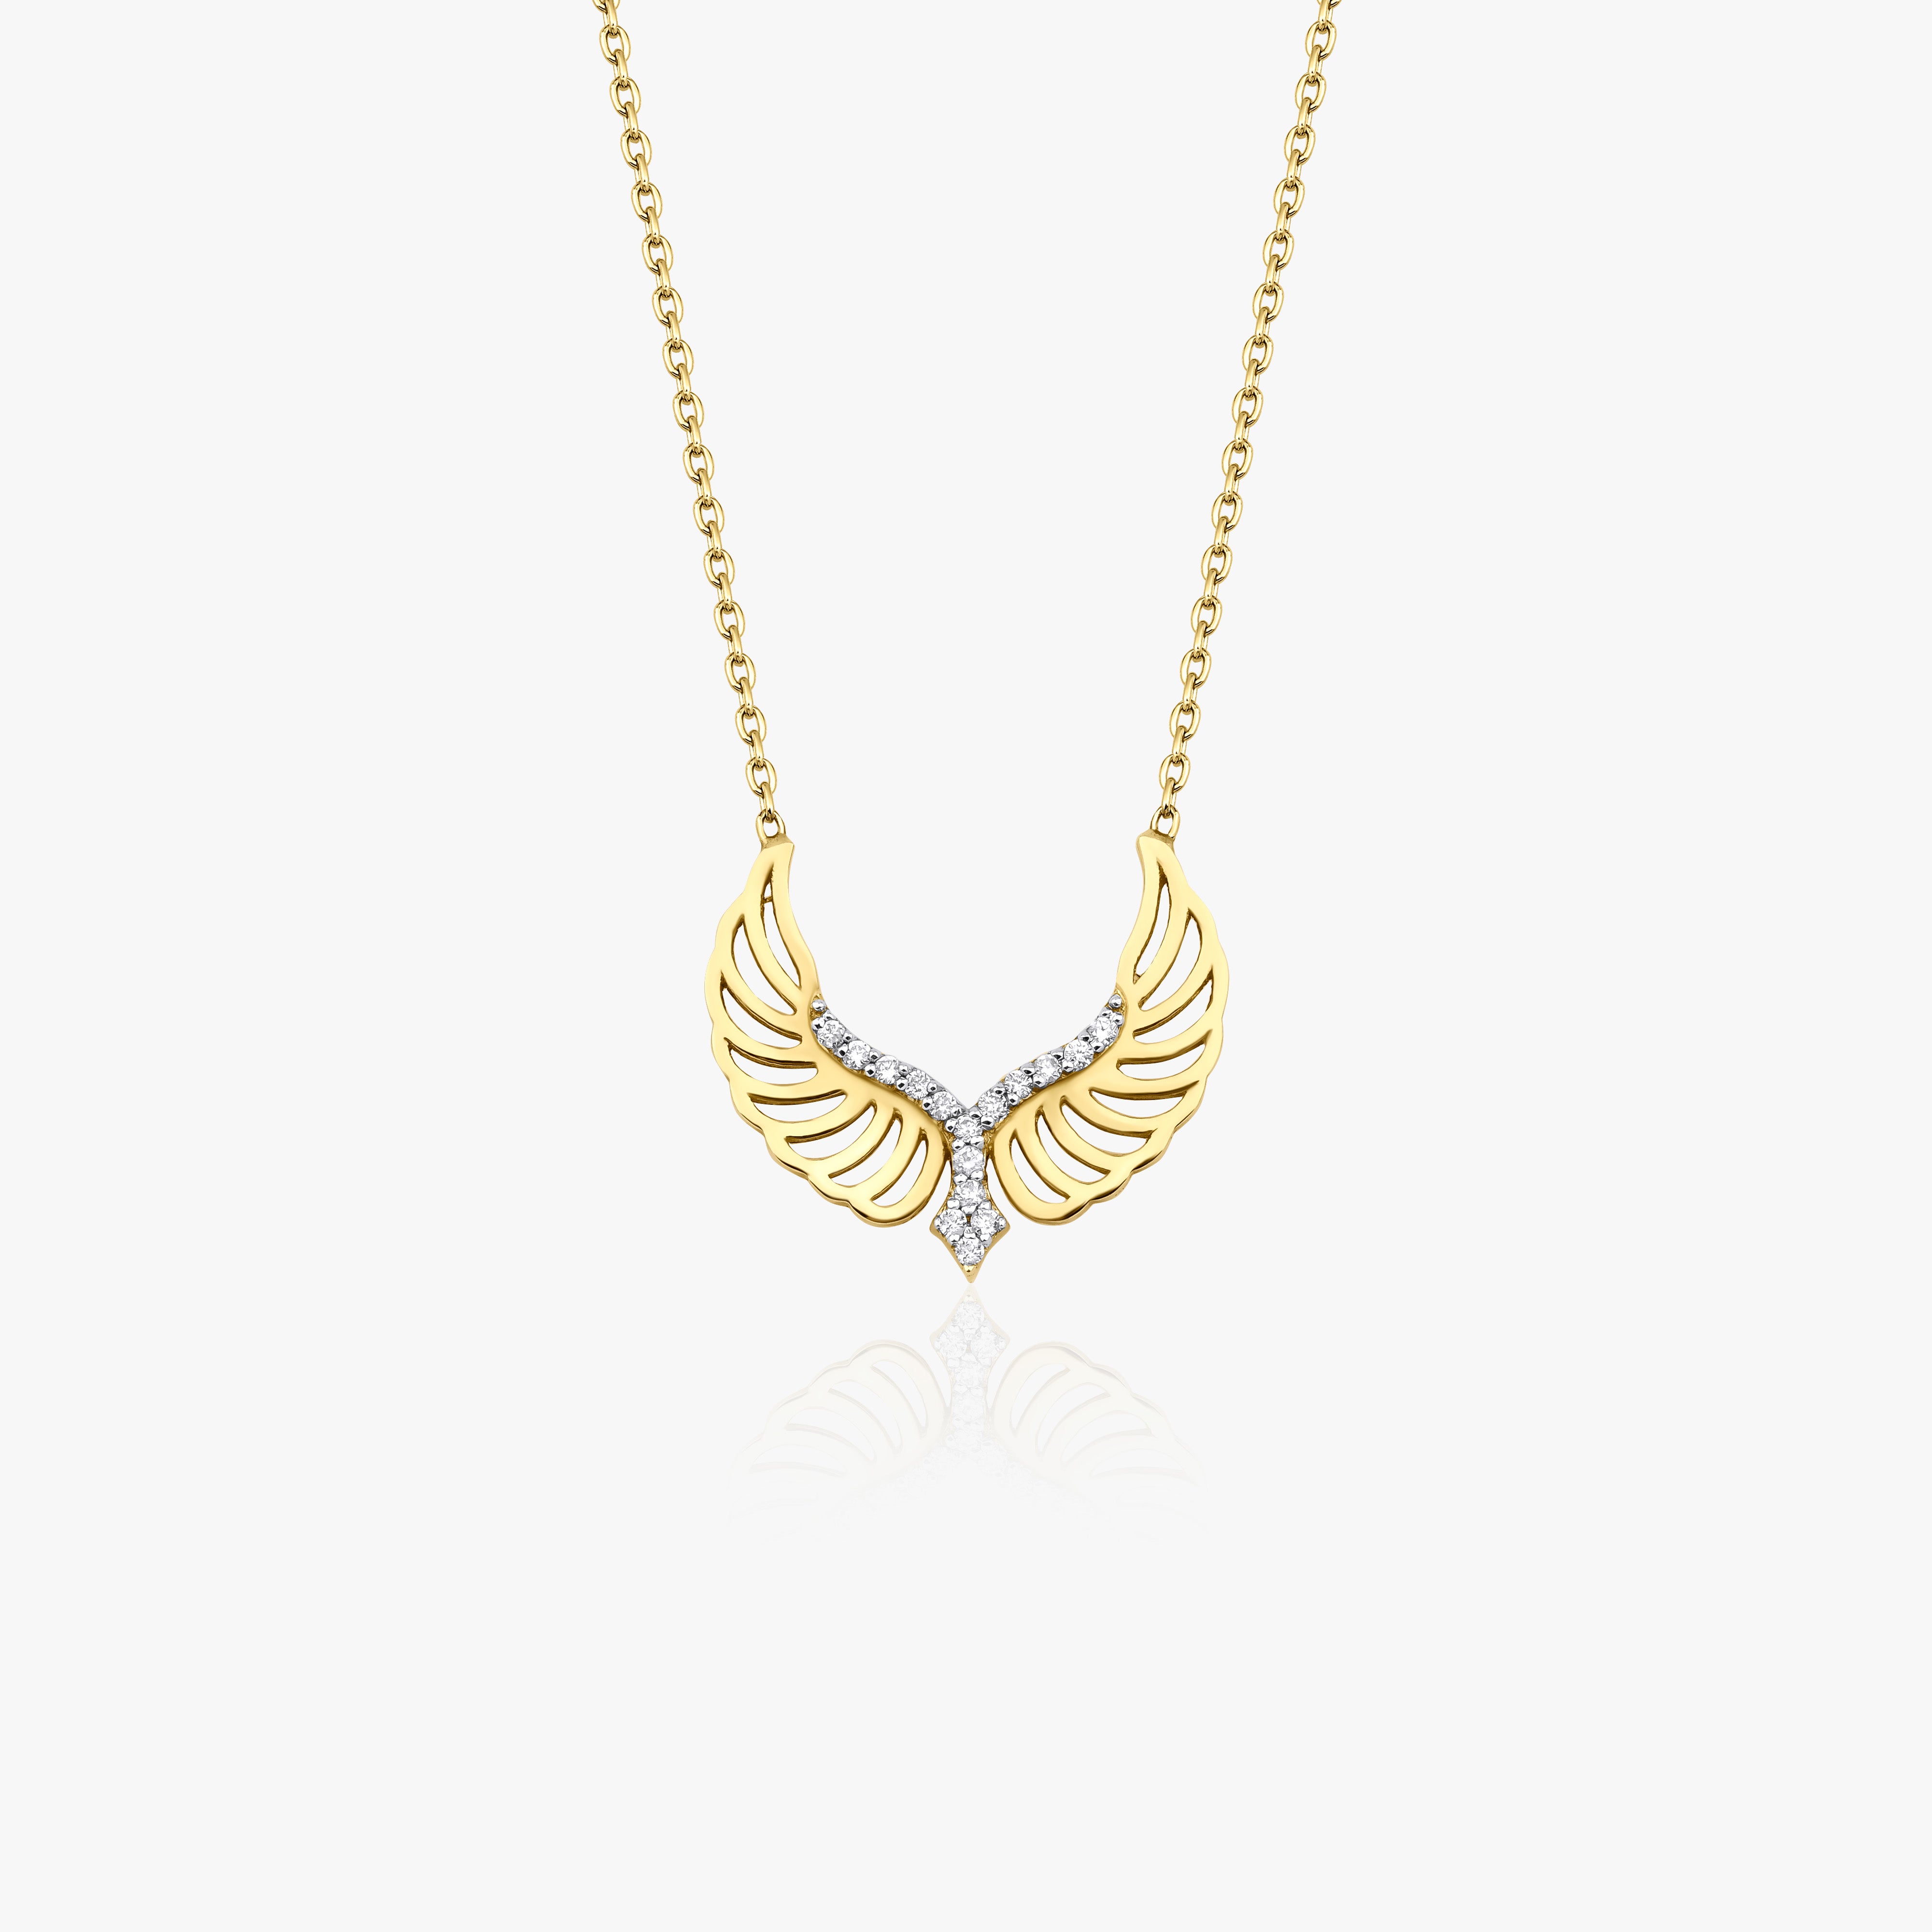 Diamond Angel Wing Necklace Available in 14K and 18K Gold